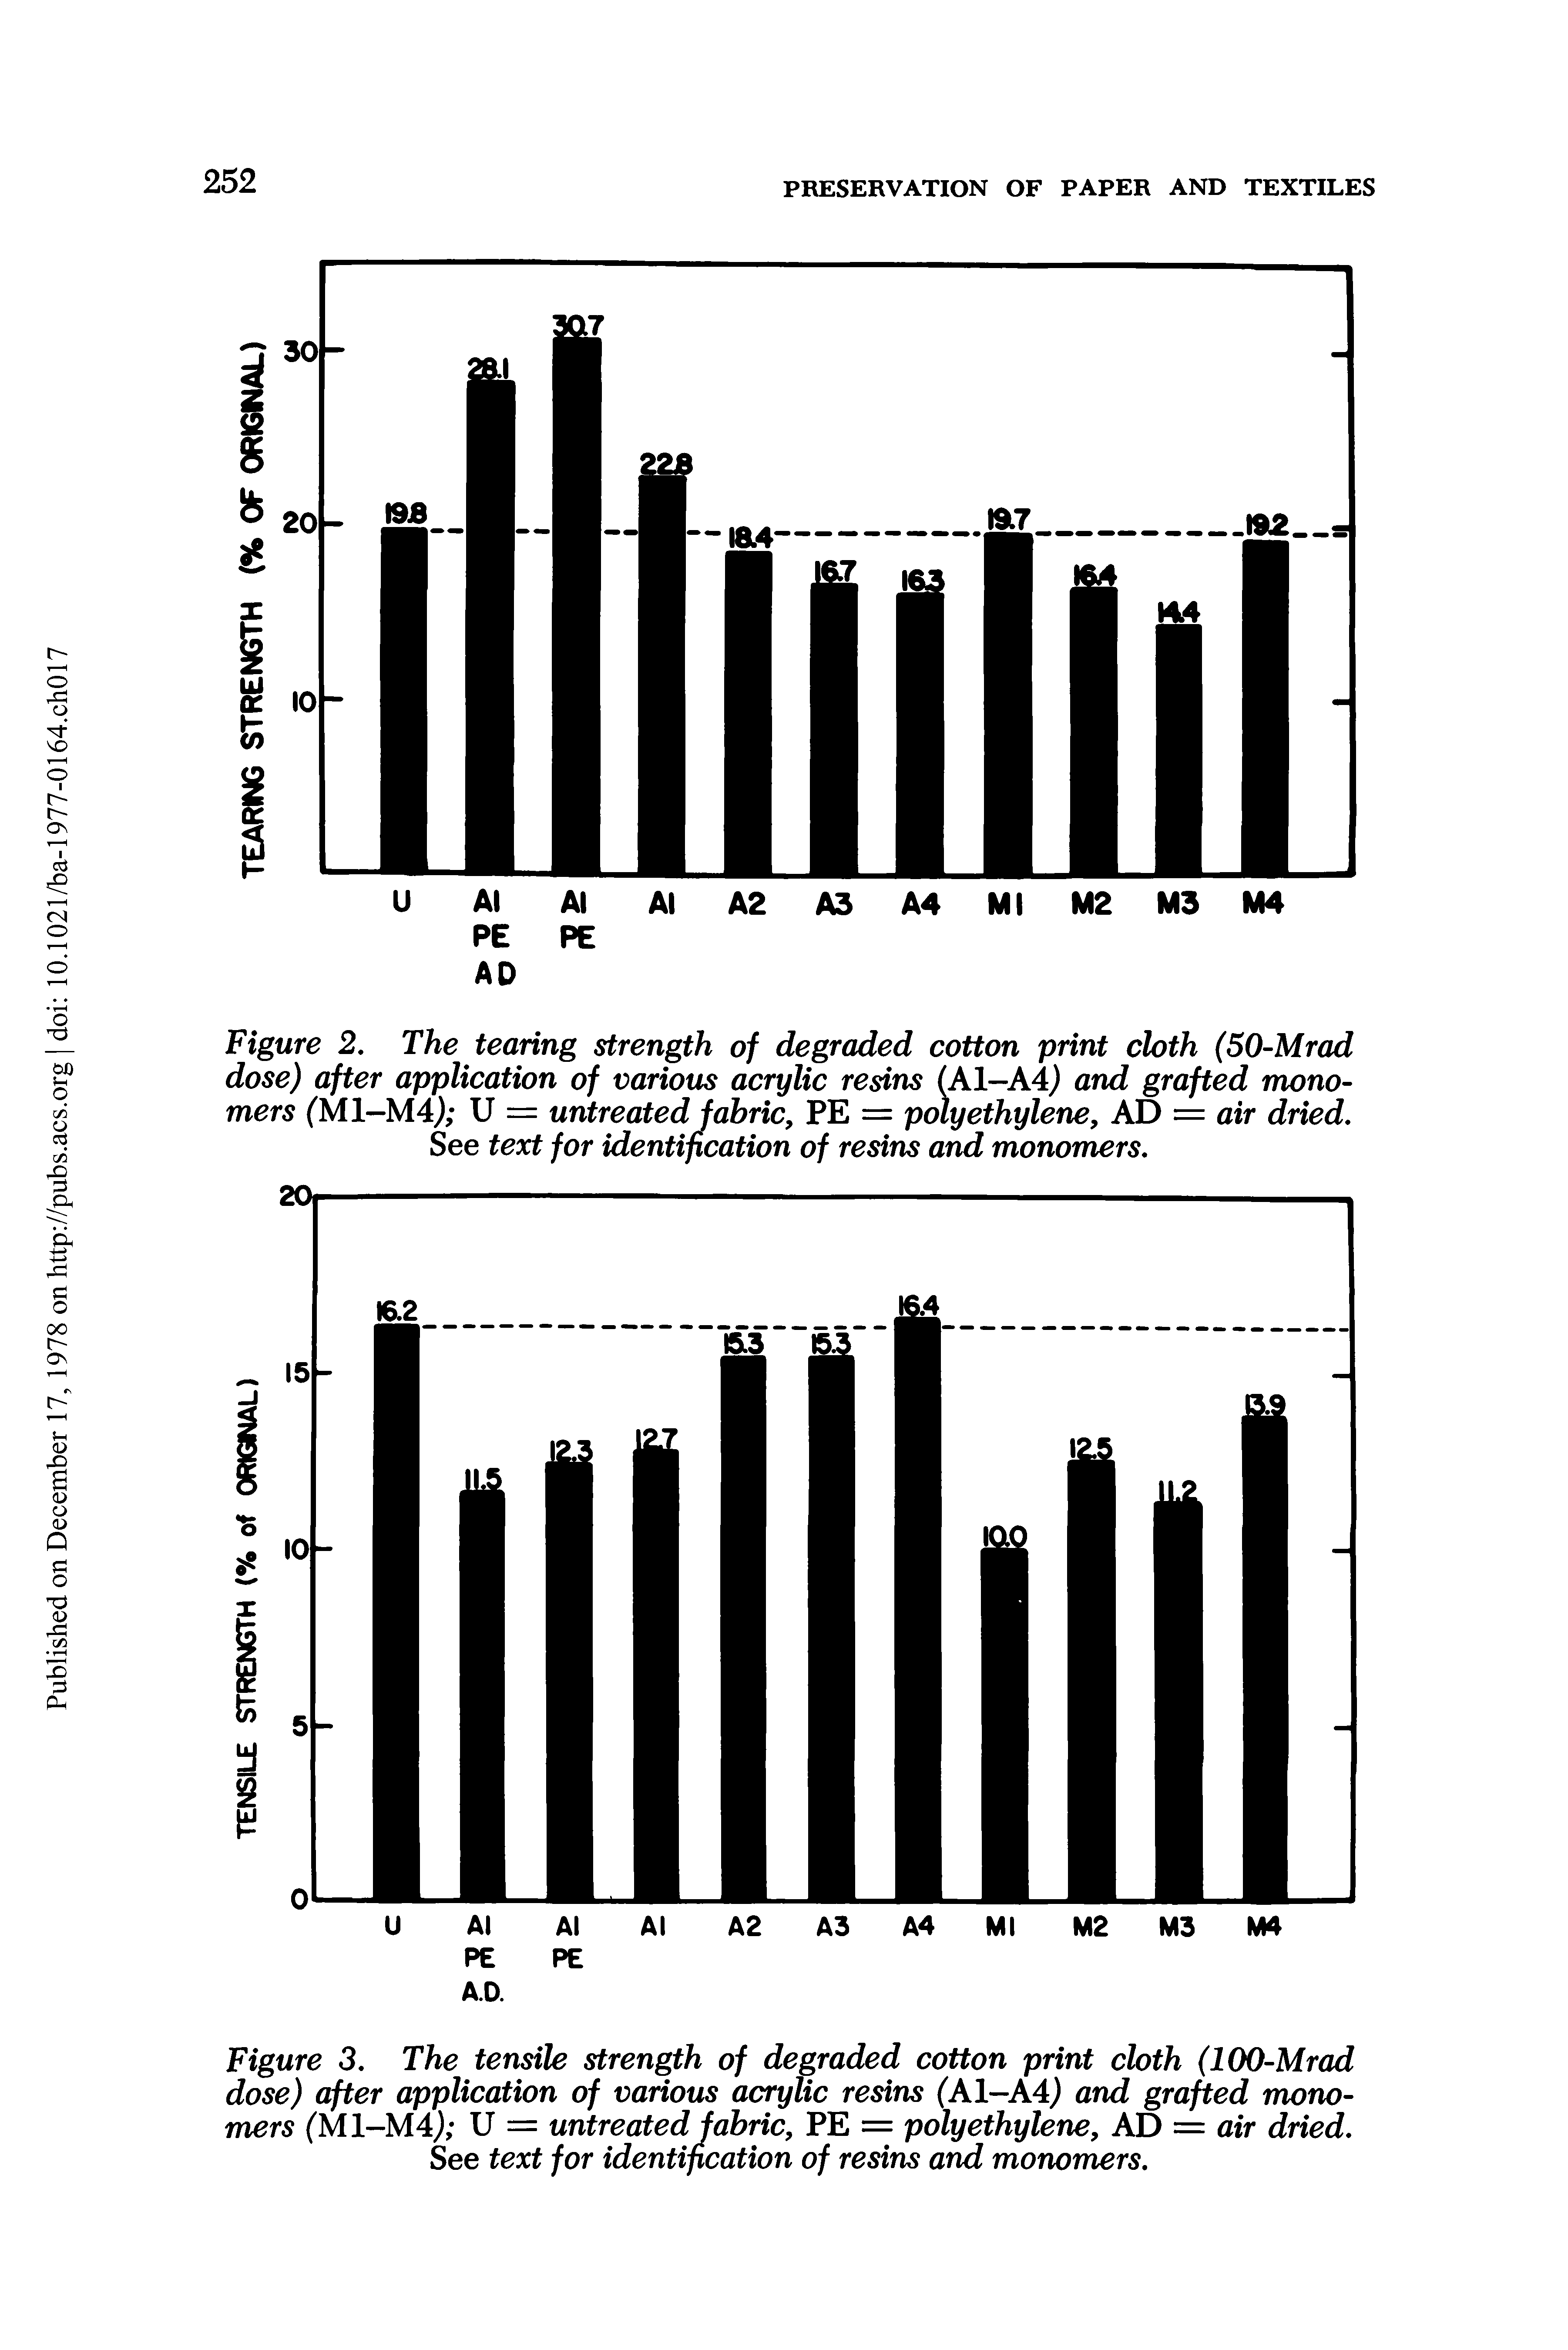 Figure 2. The tearing strength of degraded cotton print cloth (50-Mrad dose) after application of various acrylic resins (A1-A4) and grafted monomers (M1-M4J U = untreated fabric, PE = polyethylene, AD = air dried. See text for identification of resins and monomers.